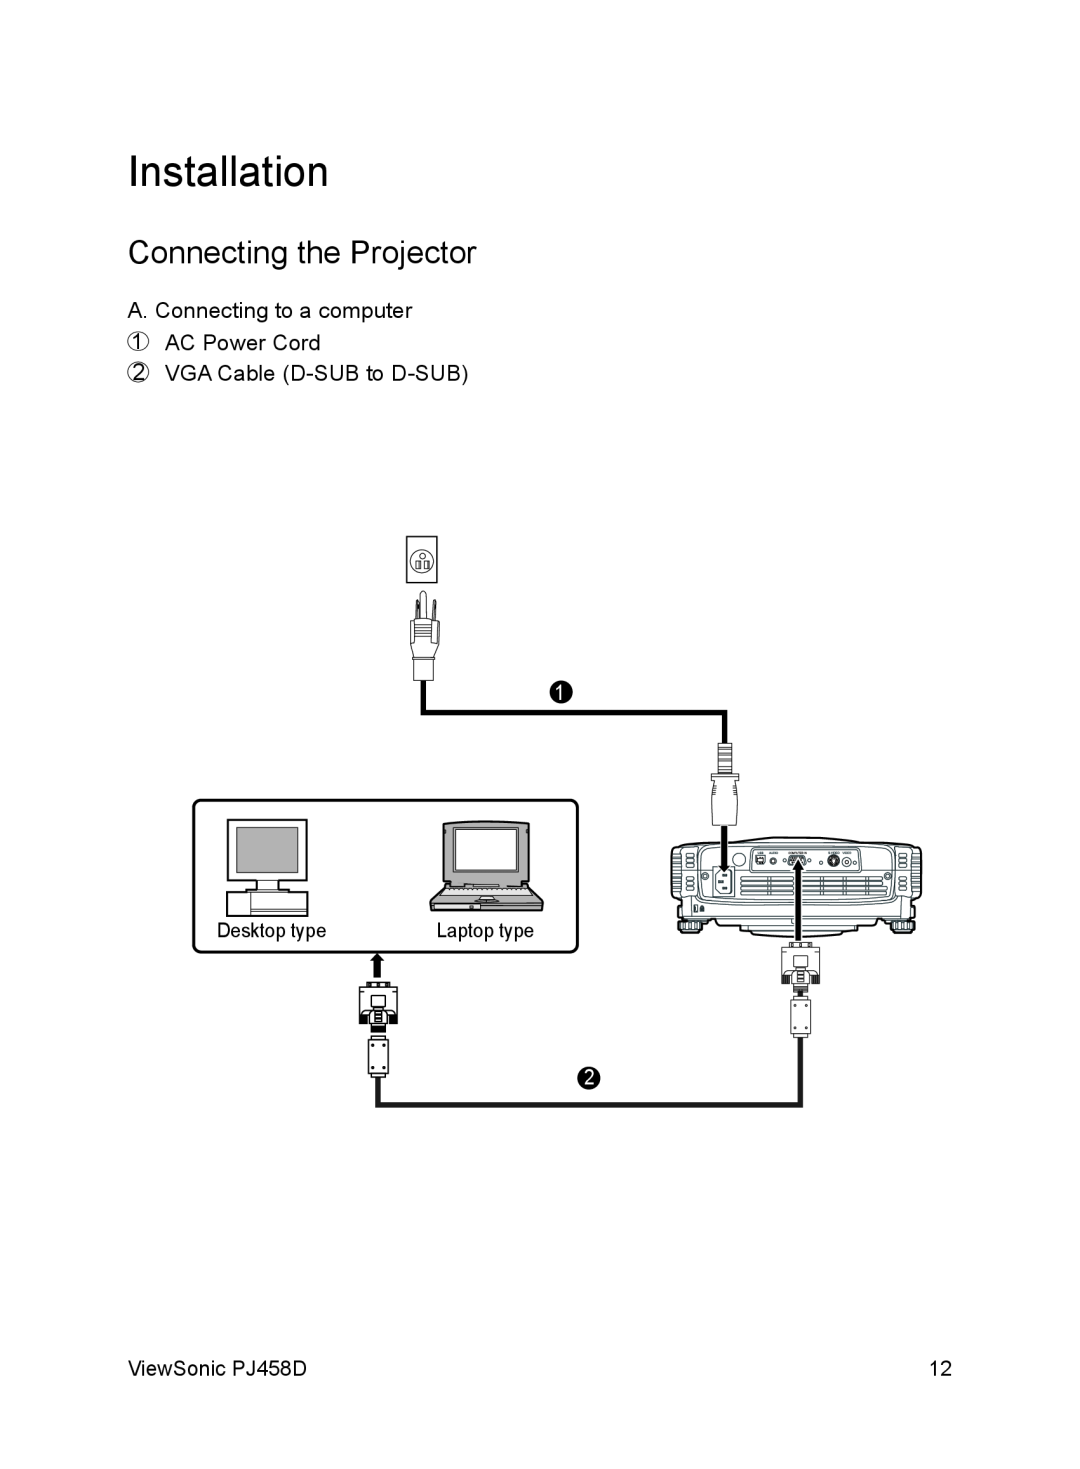 ViewSonic PJ458D manual Installation, Connecting the Projector, Laptop type 